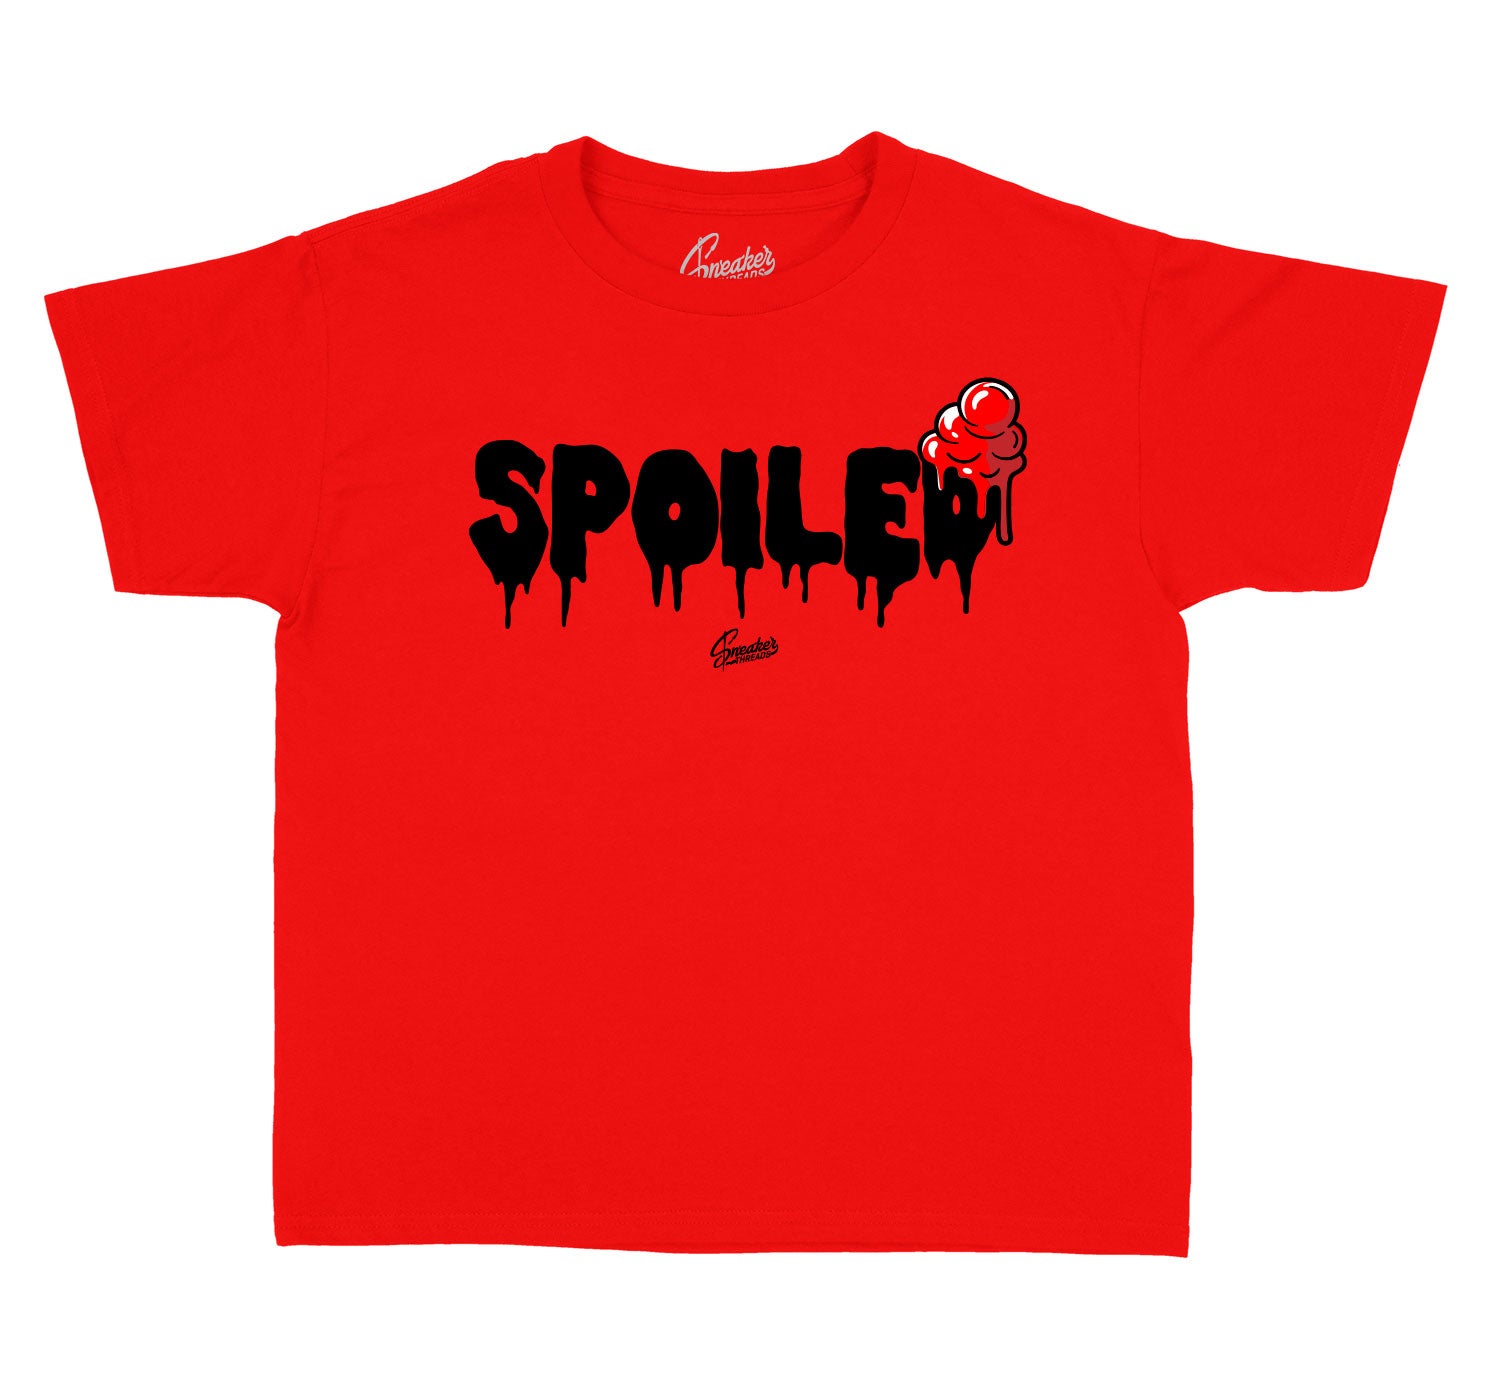 Fire Red Jordan 5 Sneaker collection matching with kids tee collection 